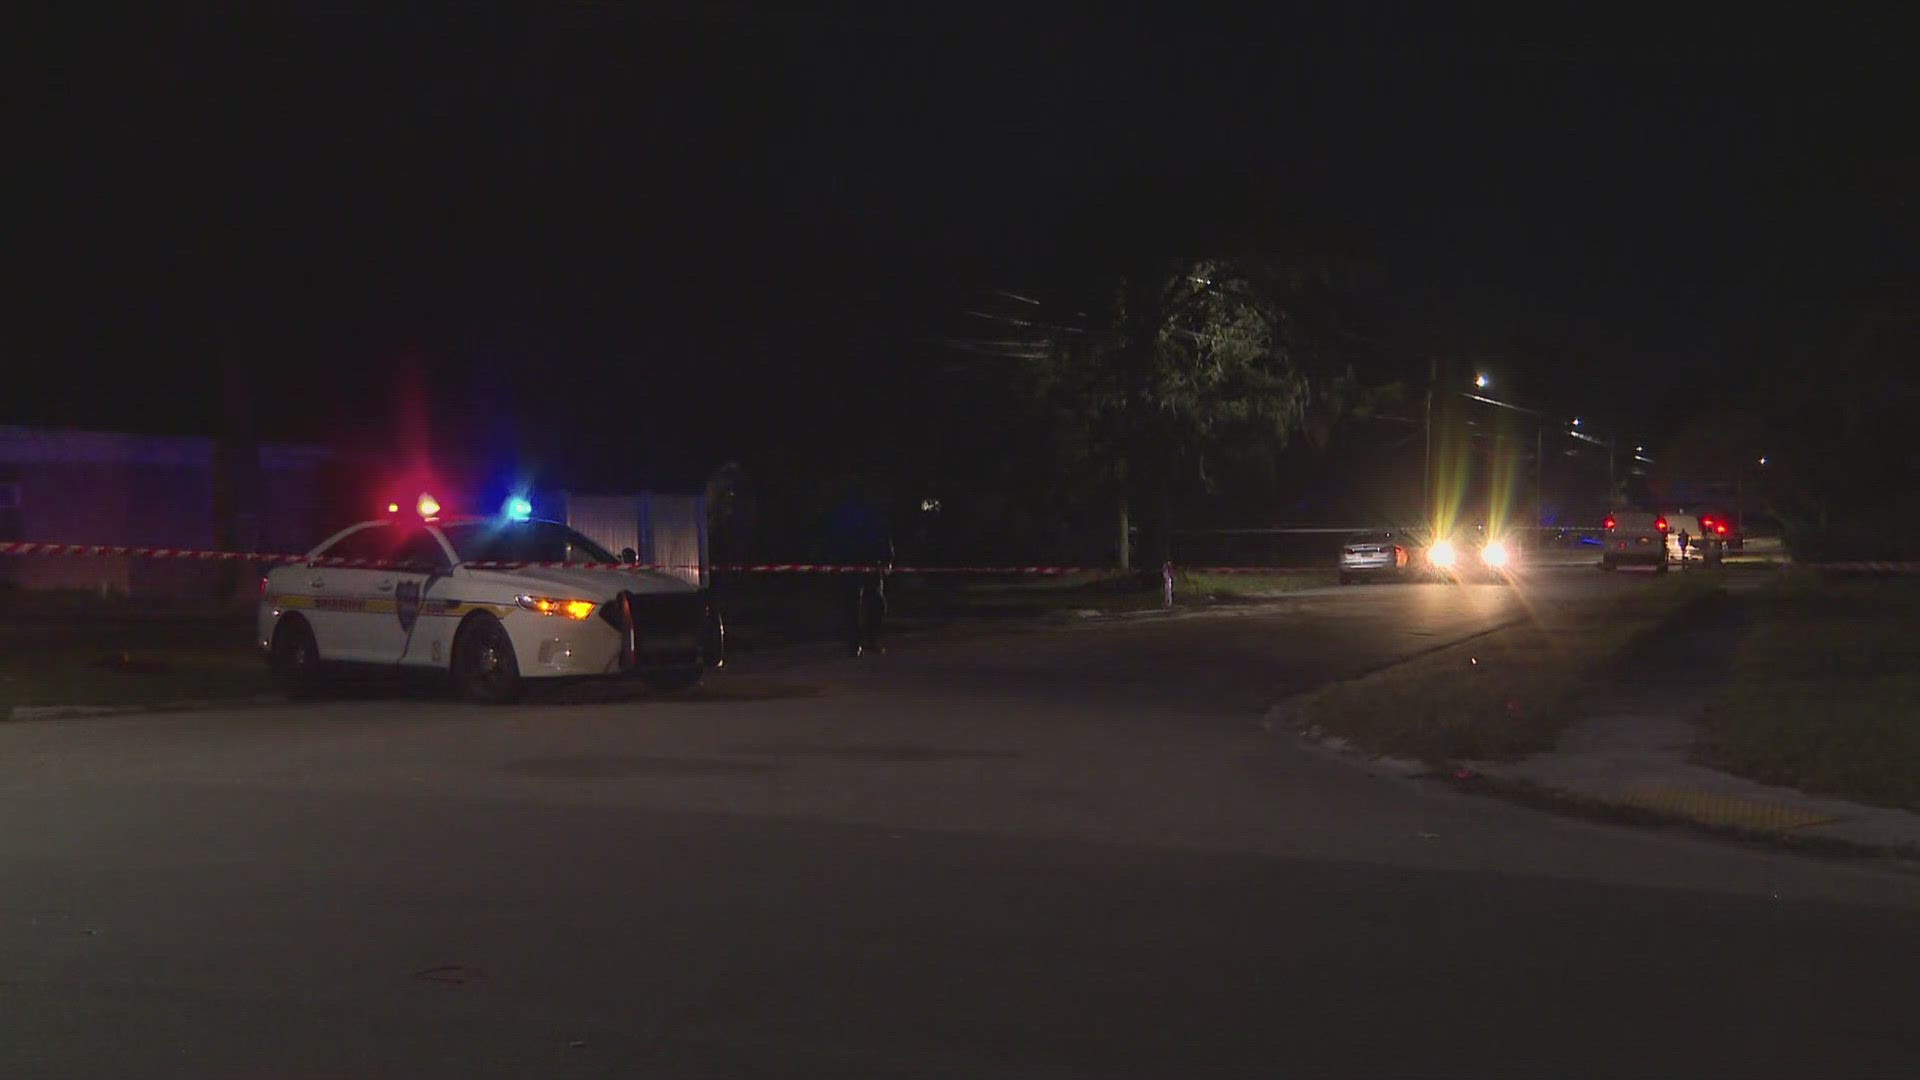 A 14-year-old boy was shot and killed in Northwest Jacksonville in the evening time on New Year's Day, according to the Jacksonville Sheriff's Office.